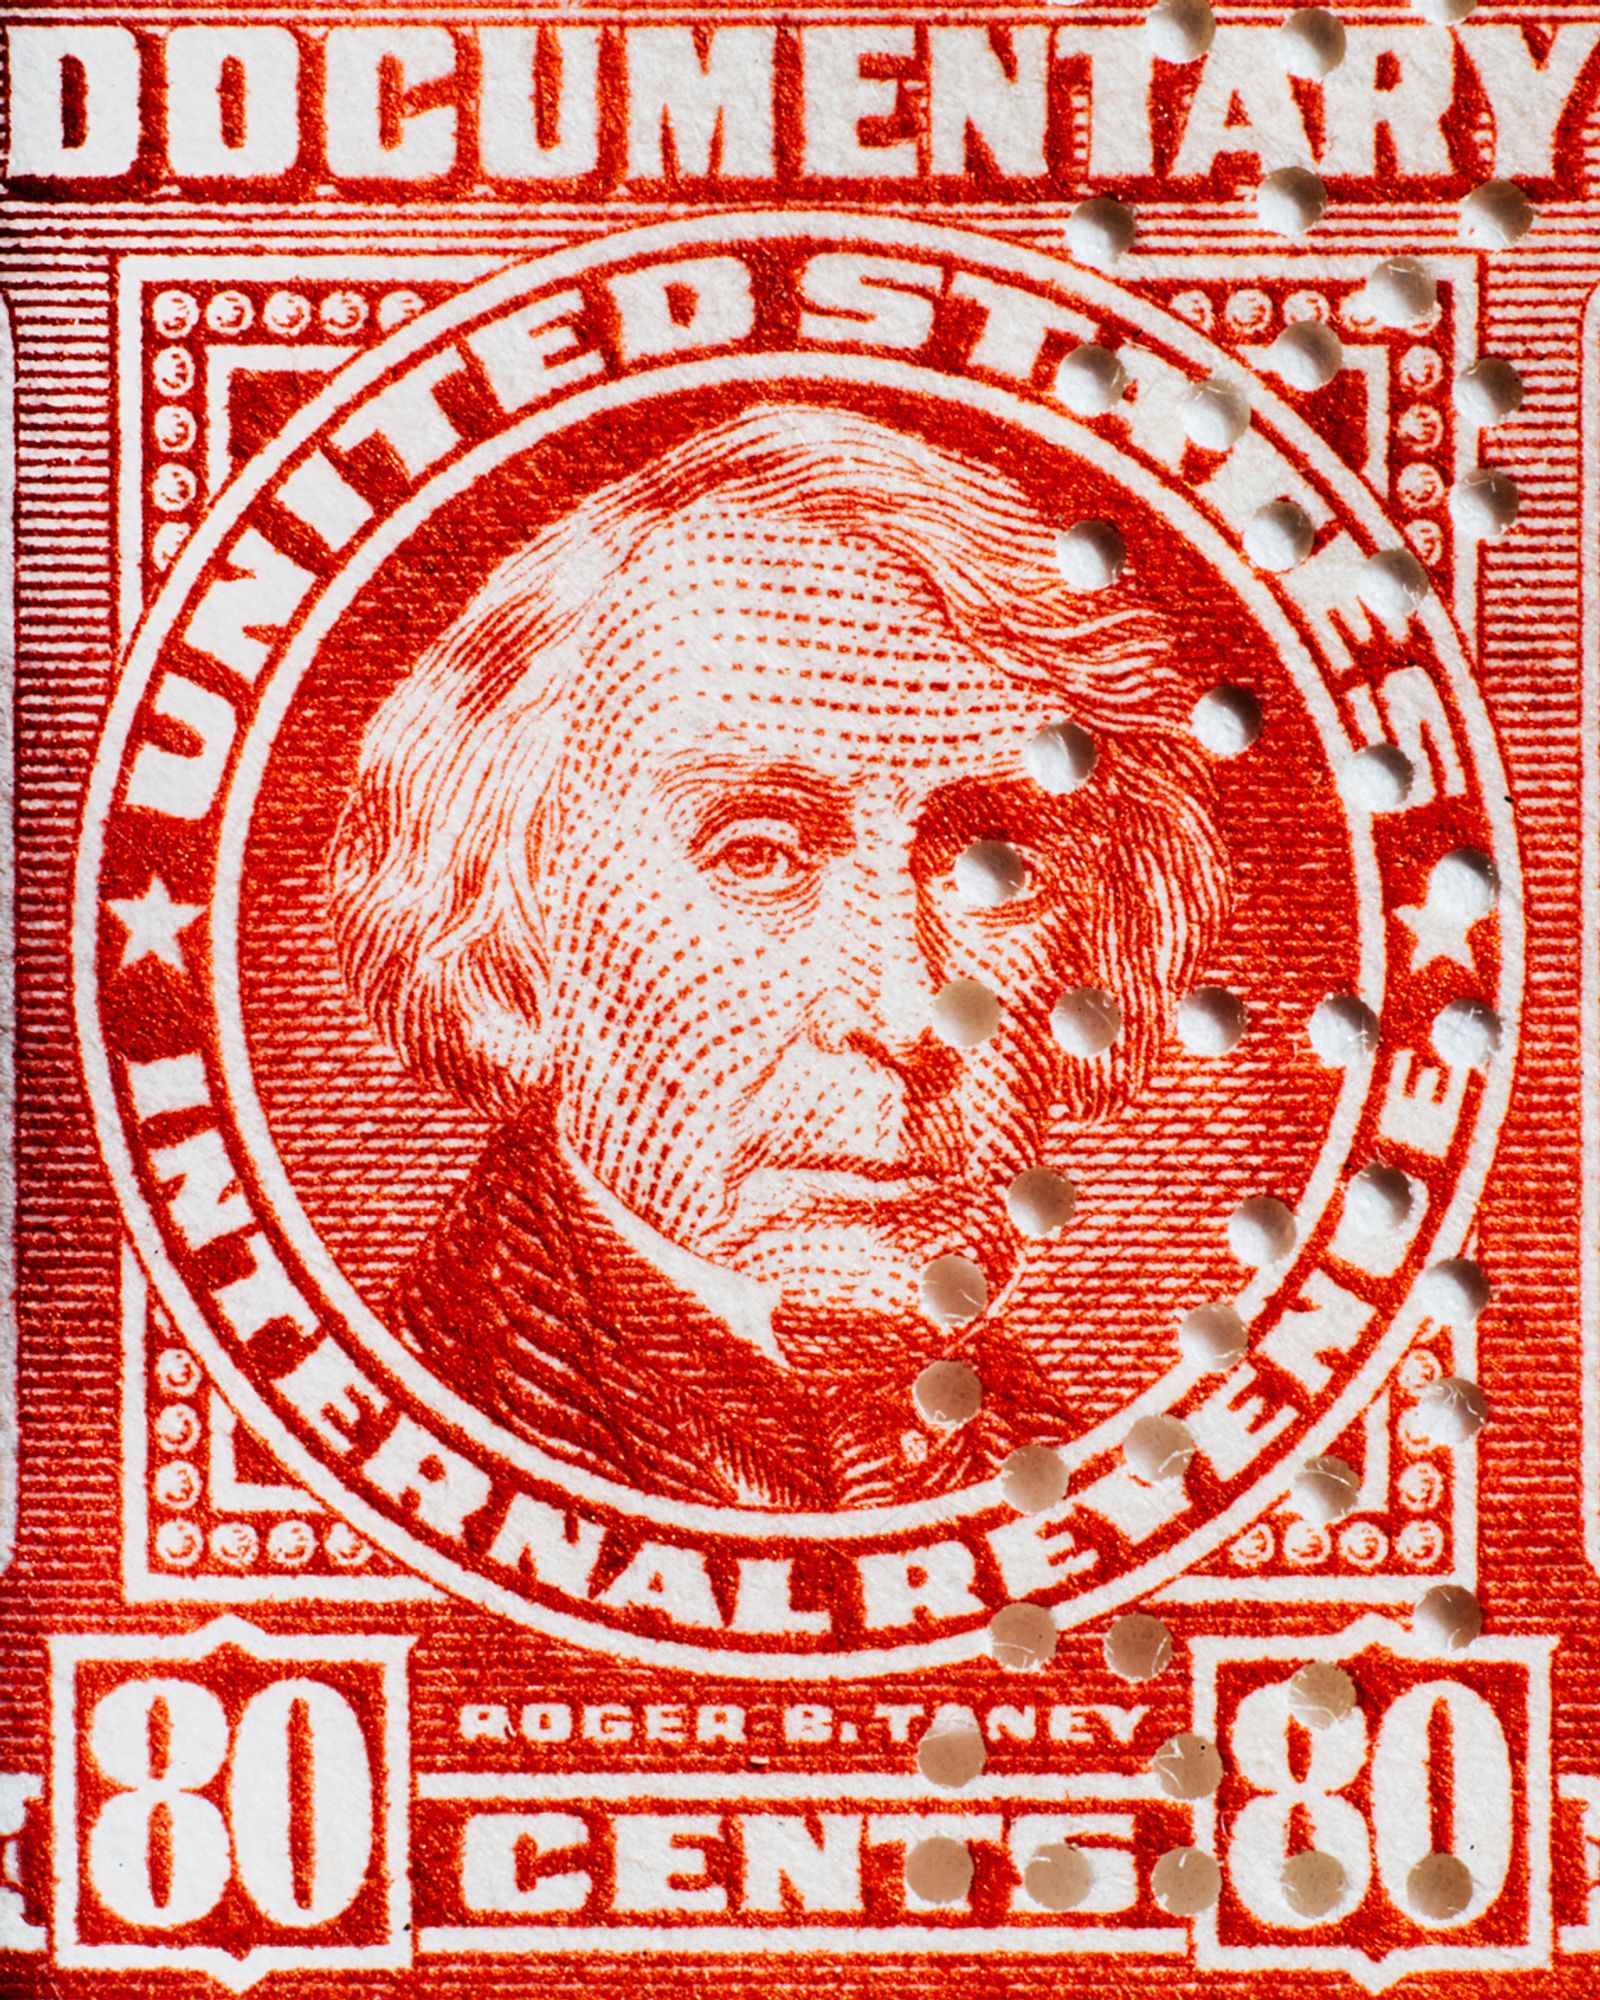 © Benjamin Rasmussen - 1958 revenue stamp of Chief Justice Roger B. Taney, author of the Dred Scott decision.